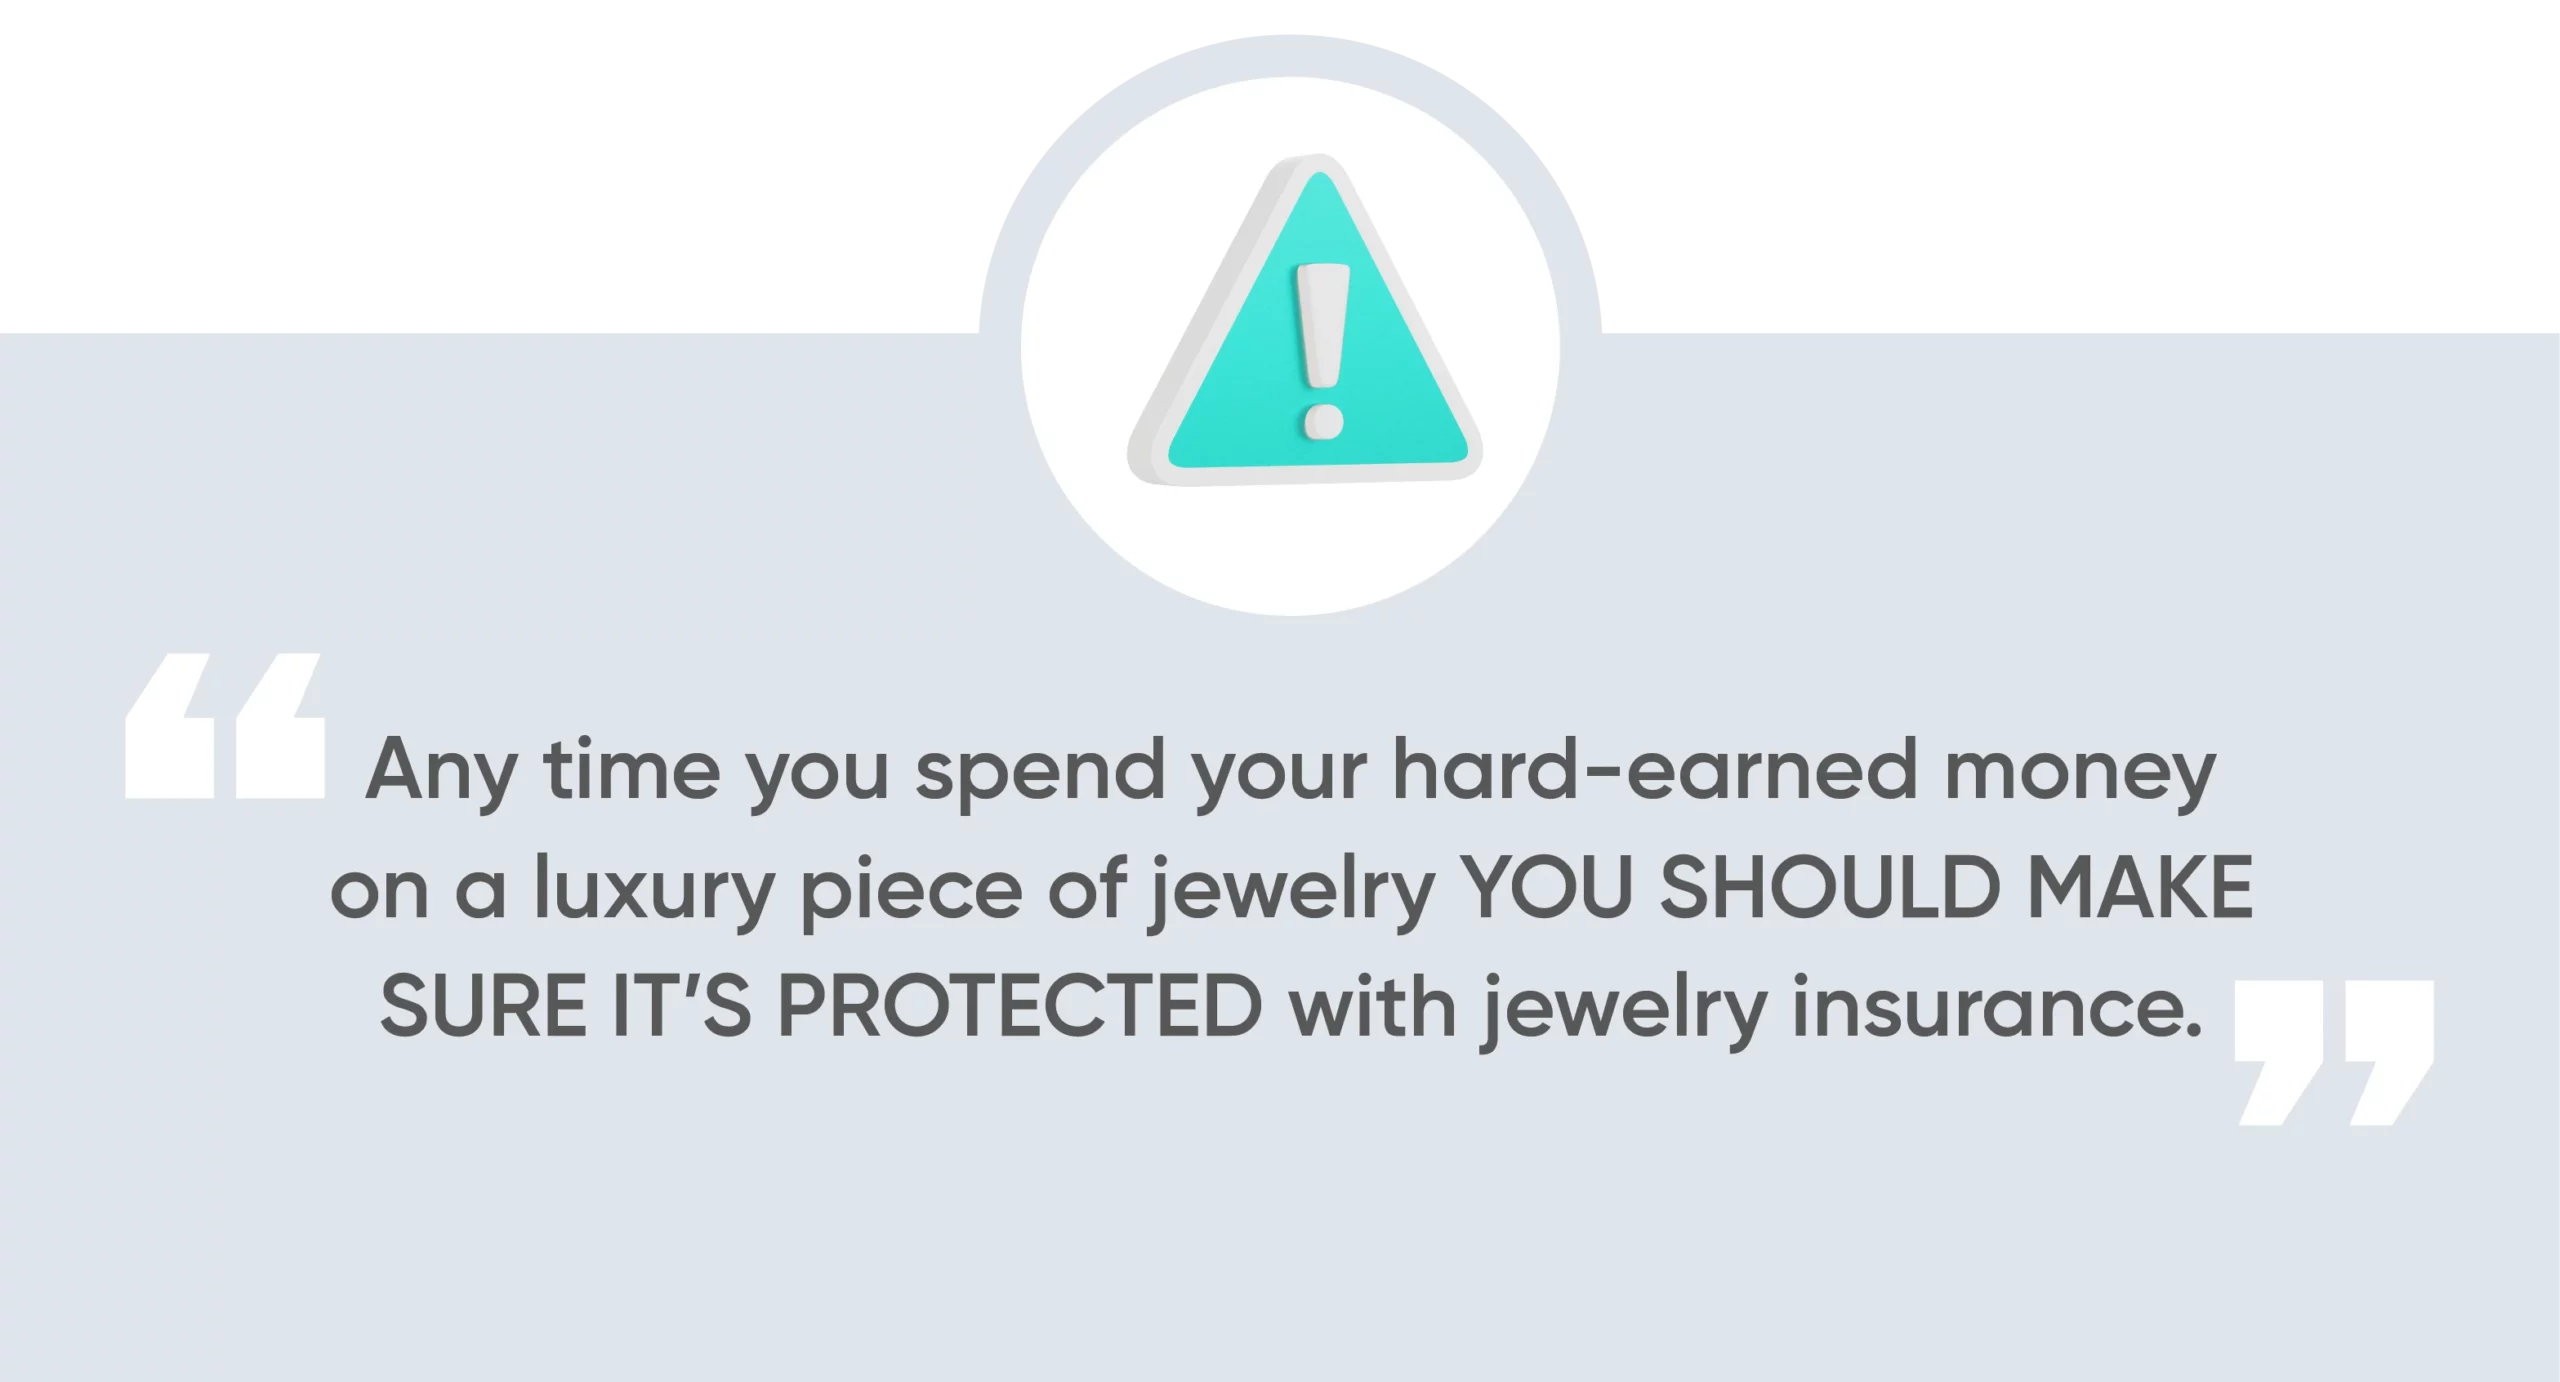 Any time you spend your hard-earned money on a luxury piece of jewelry you should make sure it’s protected with jewelry insurance.